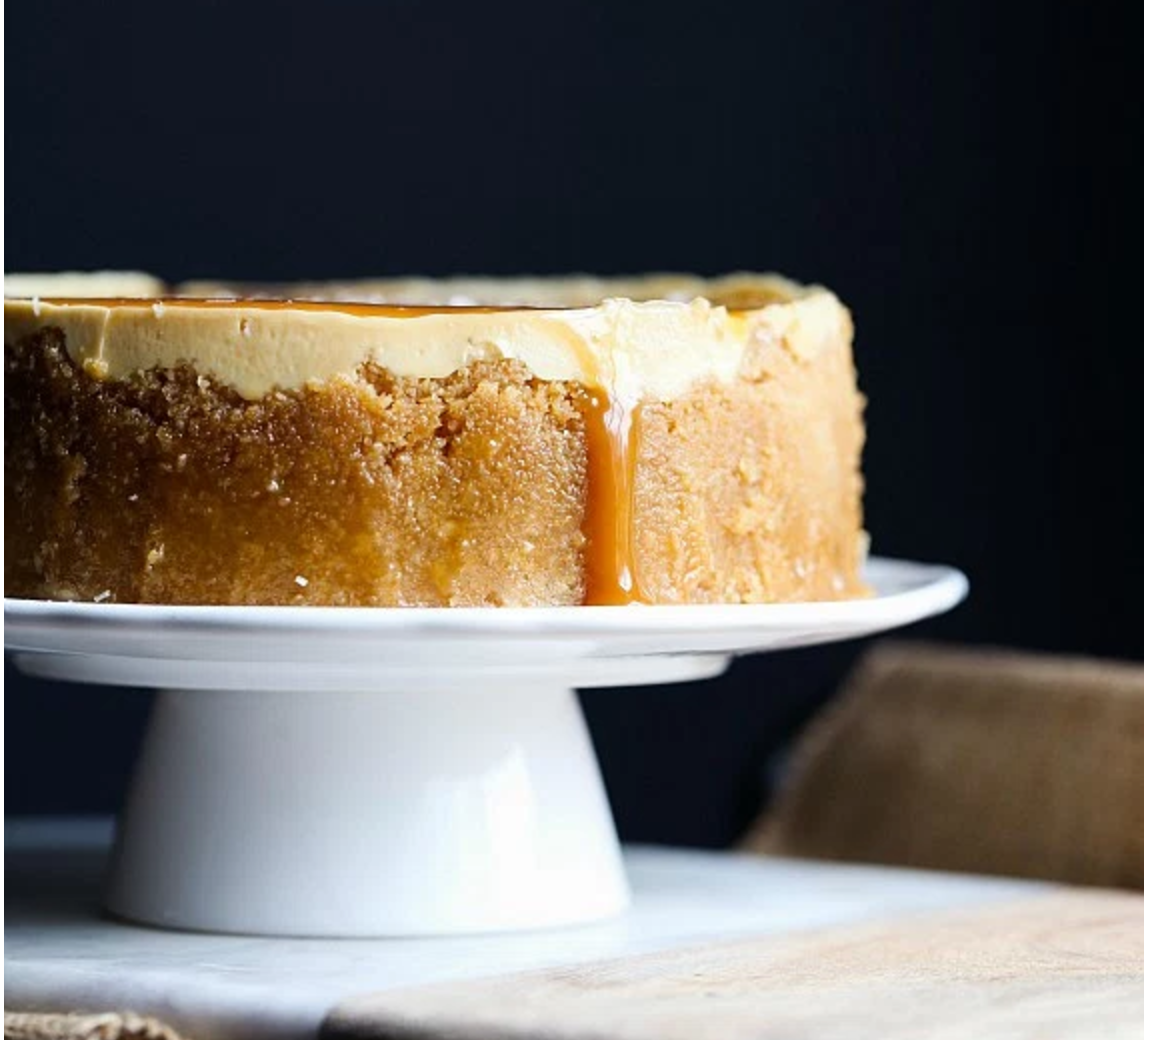 This is not my cheesecake, picture from here: http://cookiesandcups.com/instant-pot-salted-caramel-cheesecake-2/